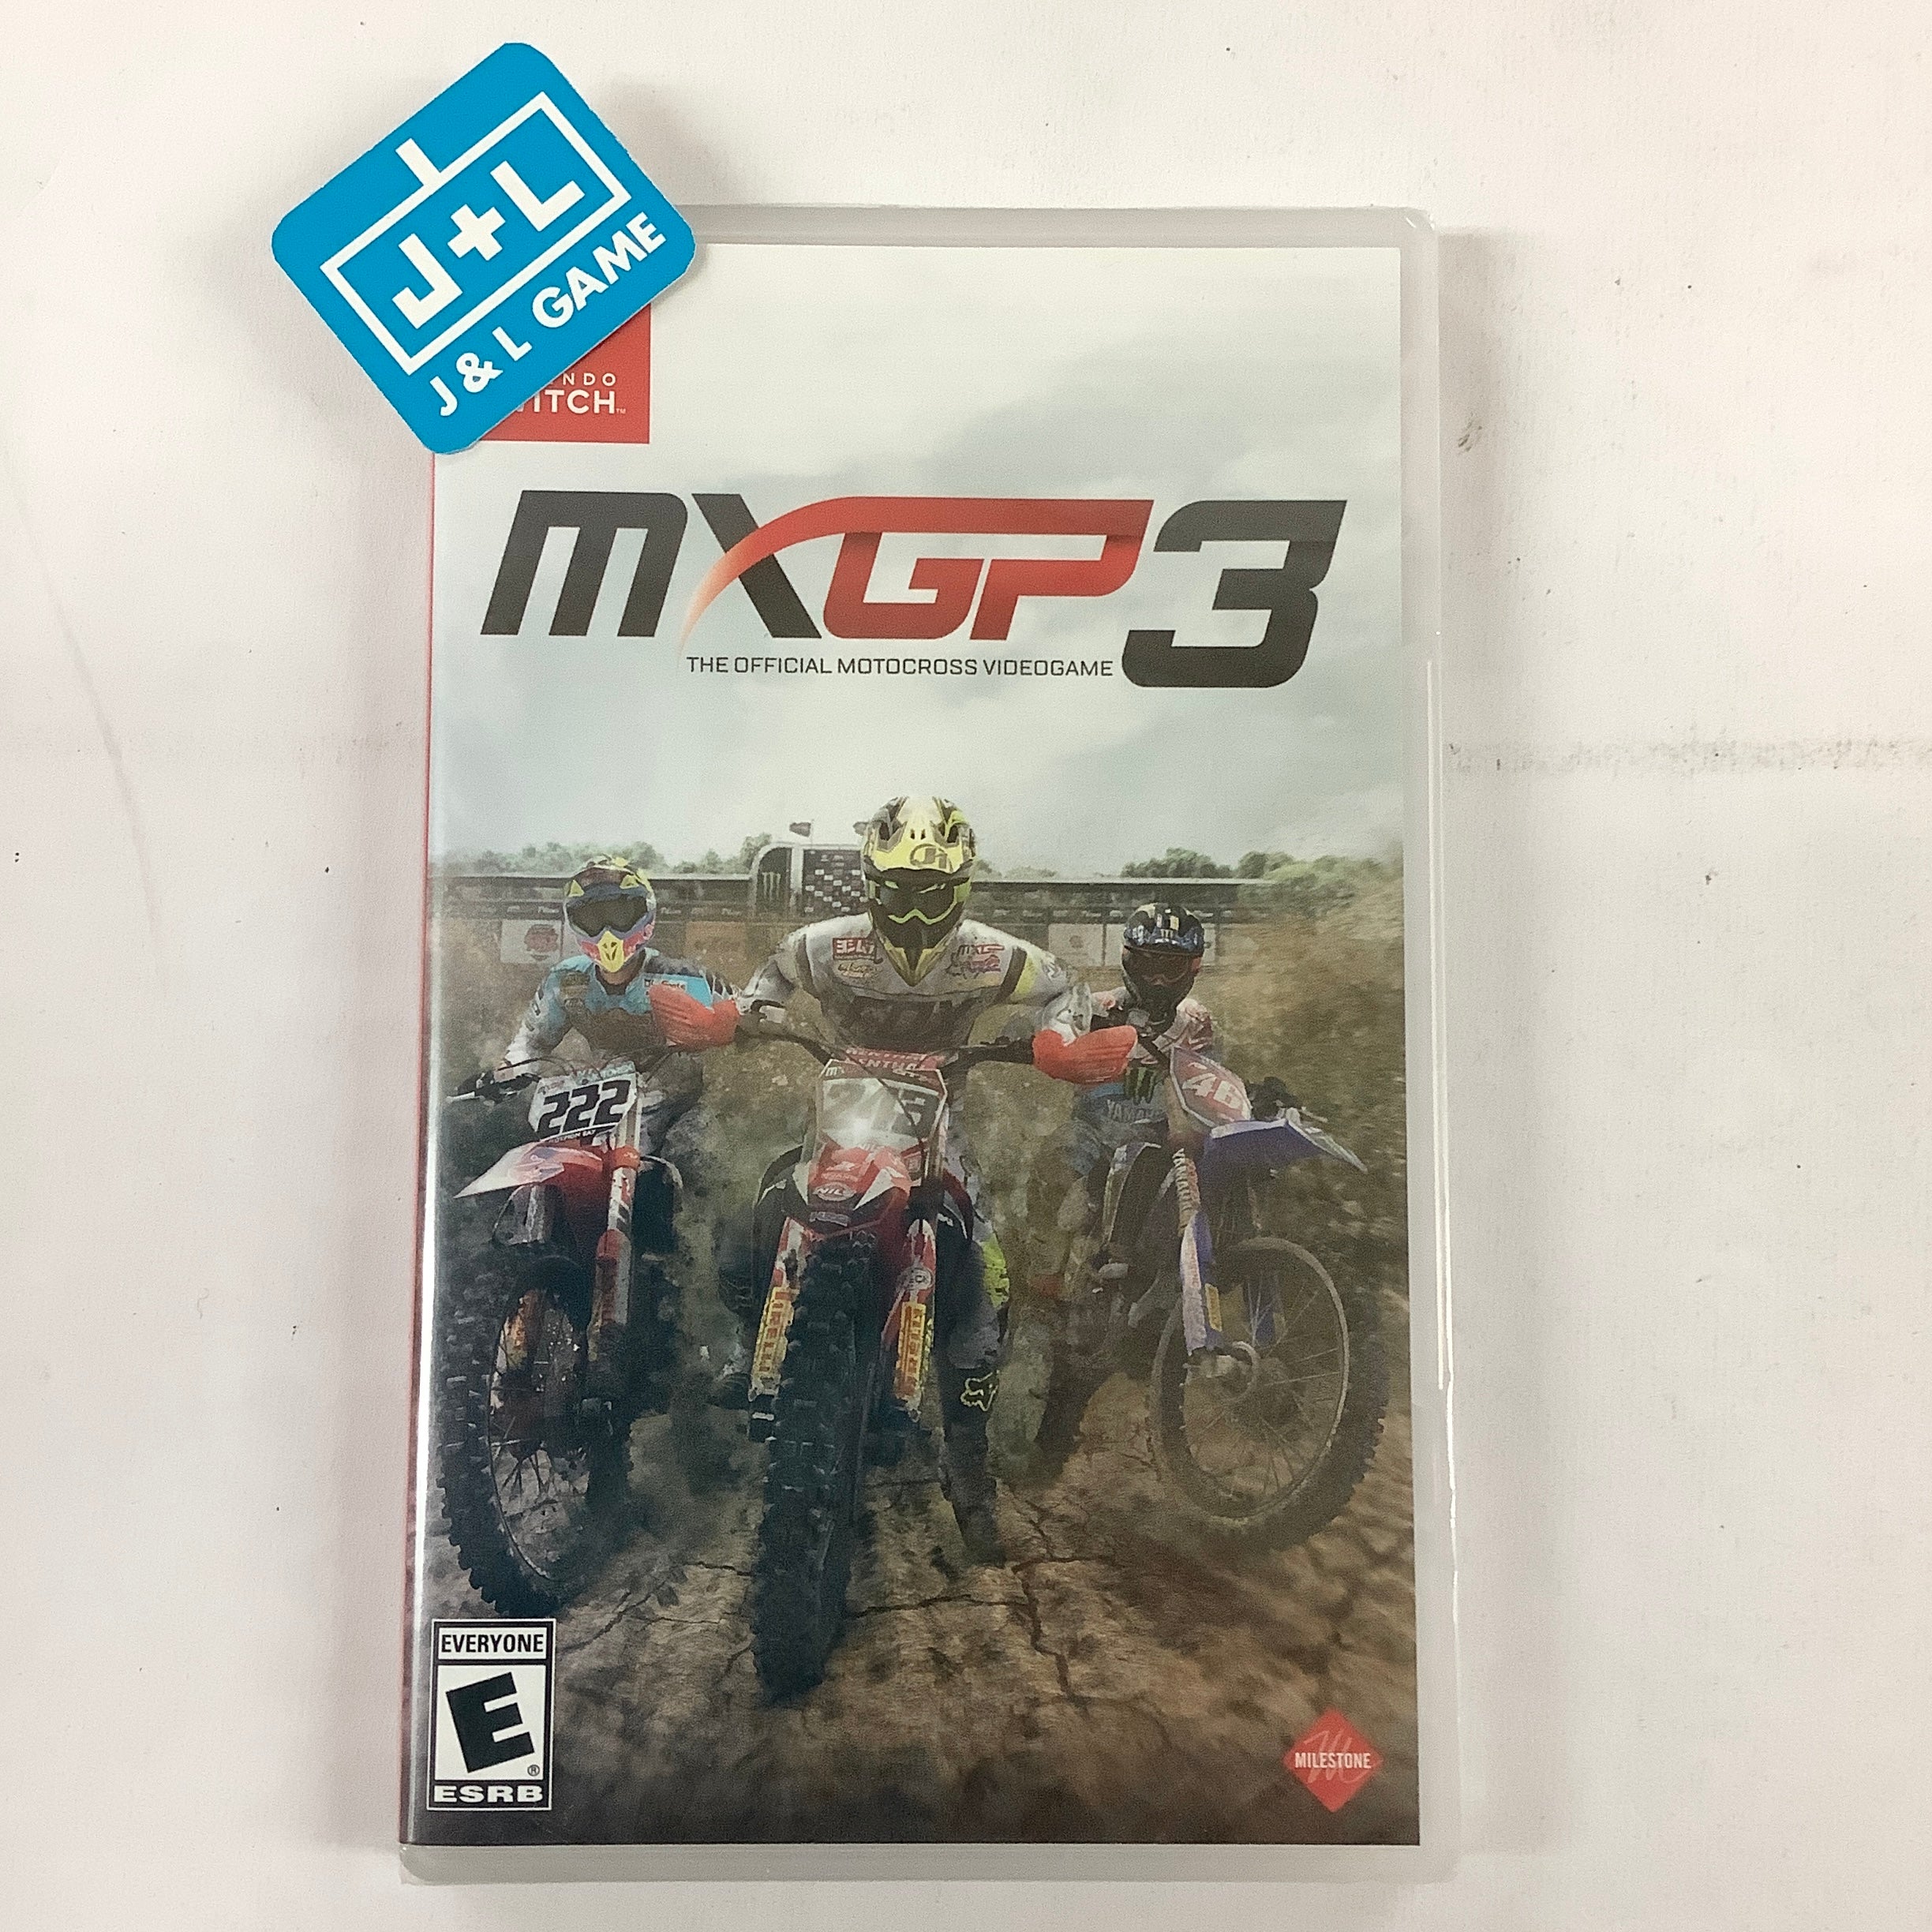 MXGP3: The Official Motocross Videogame - (NSW) Nintendo Switch Video Games Milestone S.r.l   